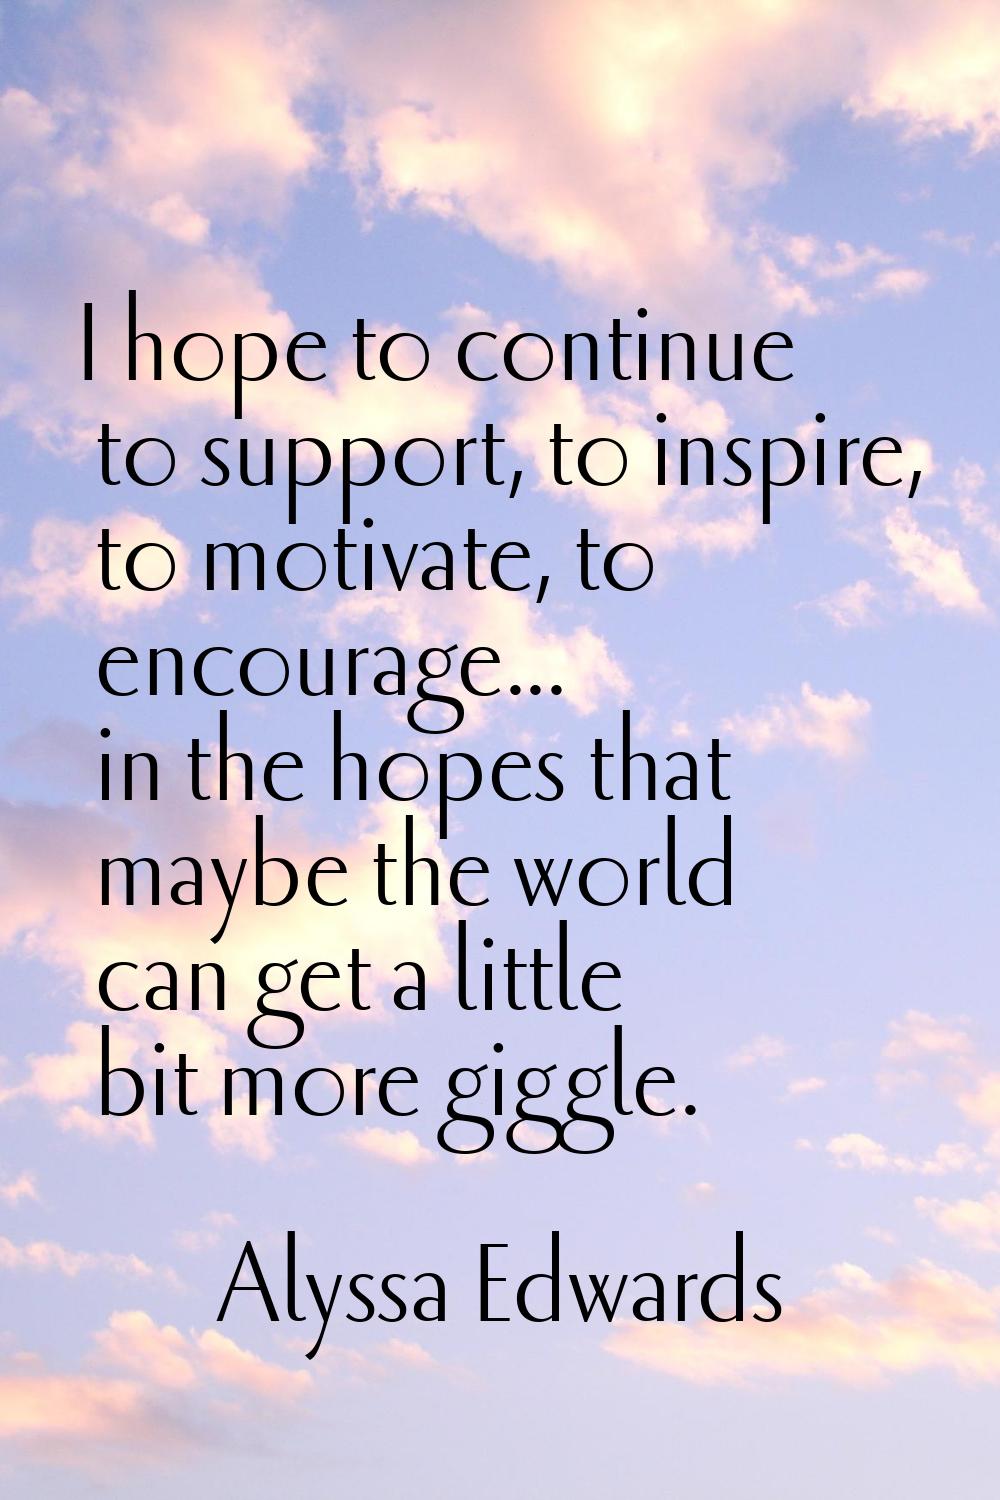 I hope to continue to support, to inspire, to motivate, to encourage... in the hopes that maybe the